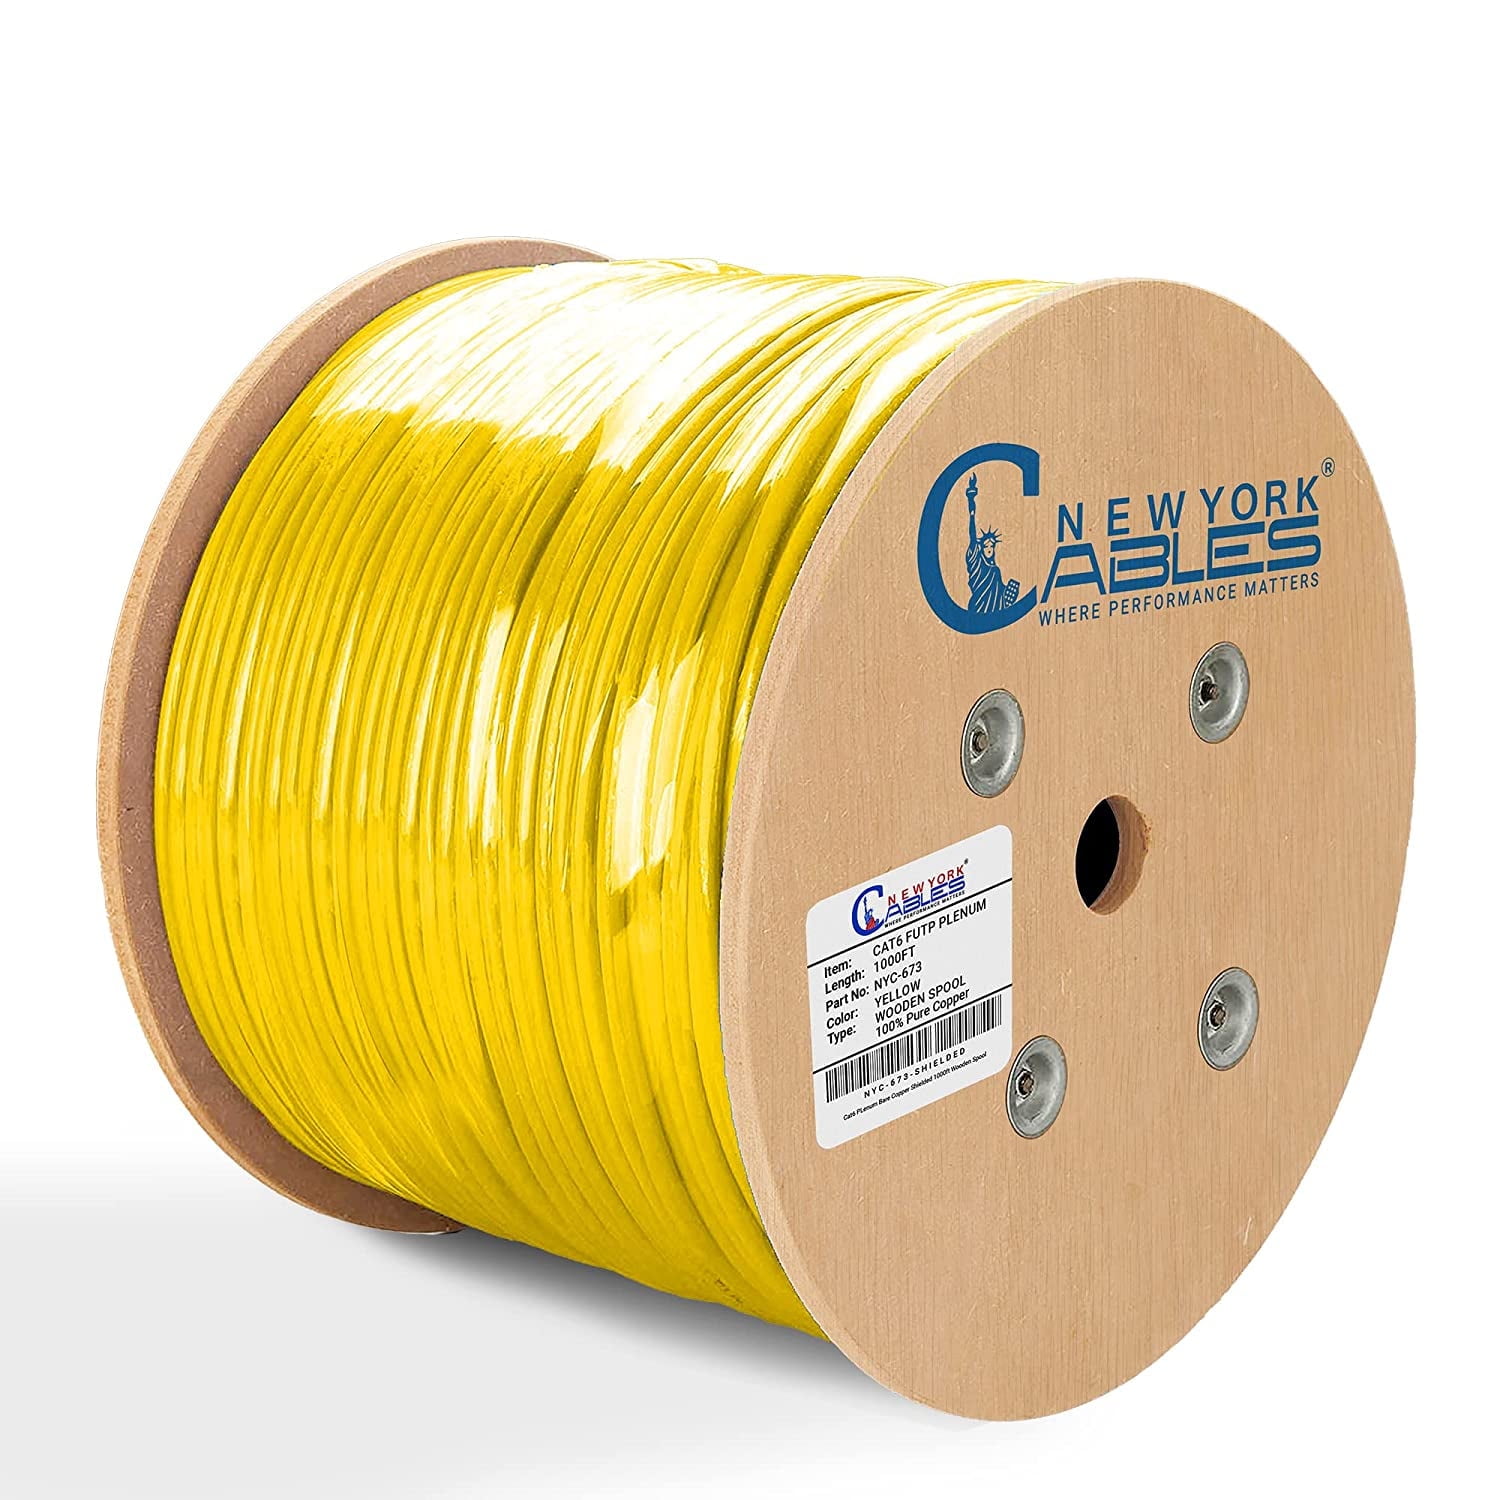 NewYork Cables Cat6 Shielded Plenum Cable 1000FT - 100% Solid Bare